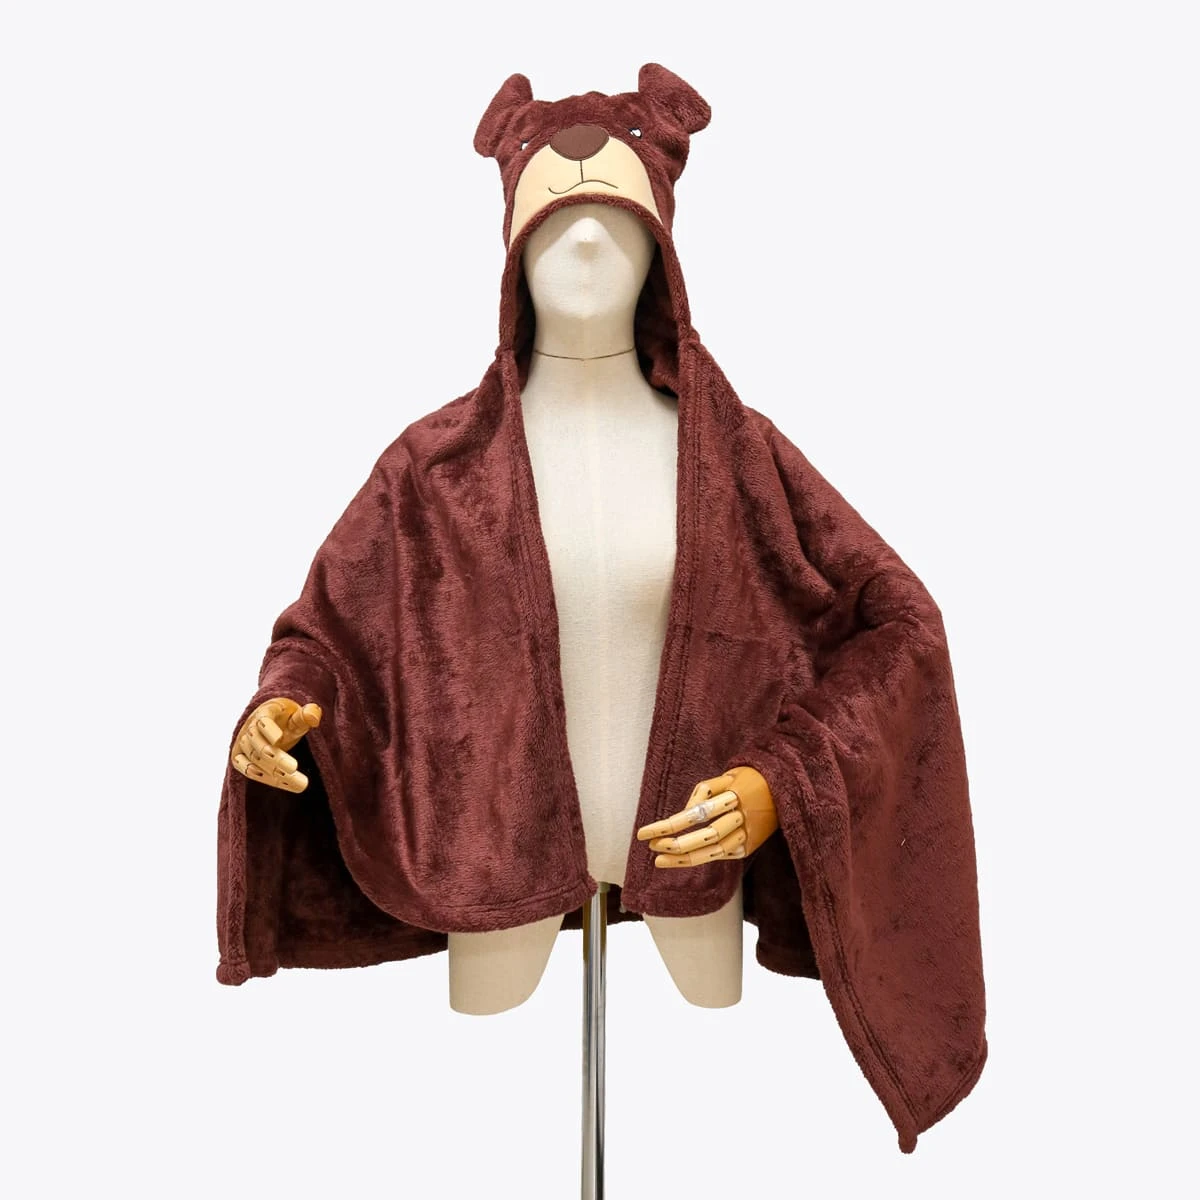 Ton 3D Embroidery Hooded Plush Blanket (Red Brown)